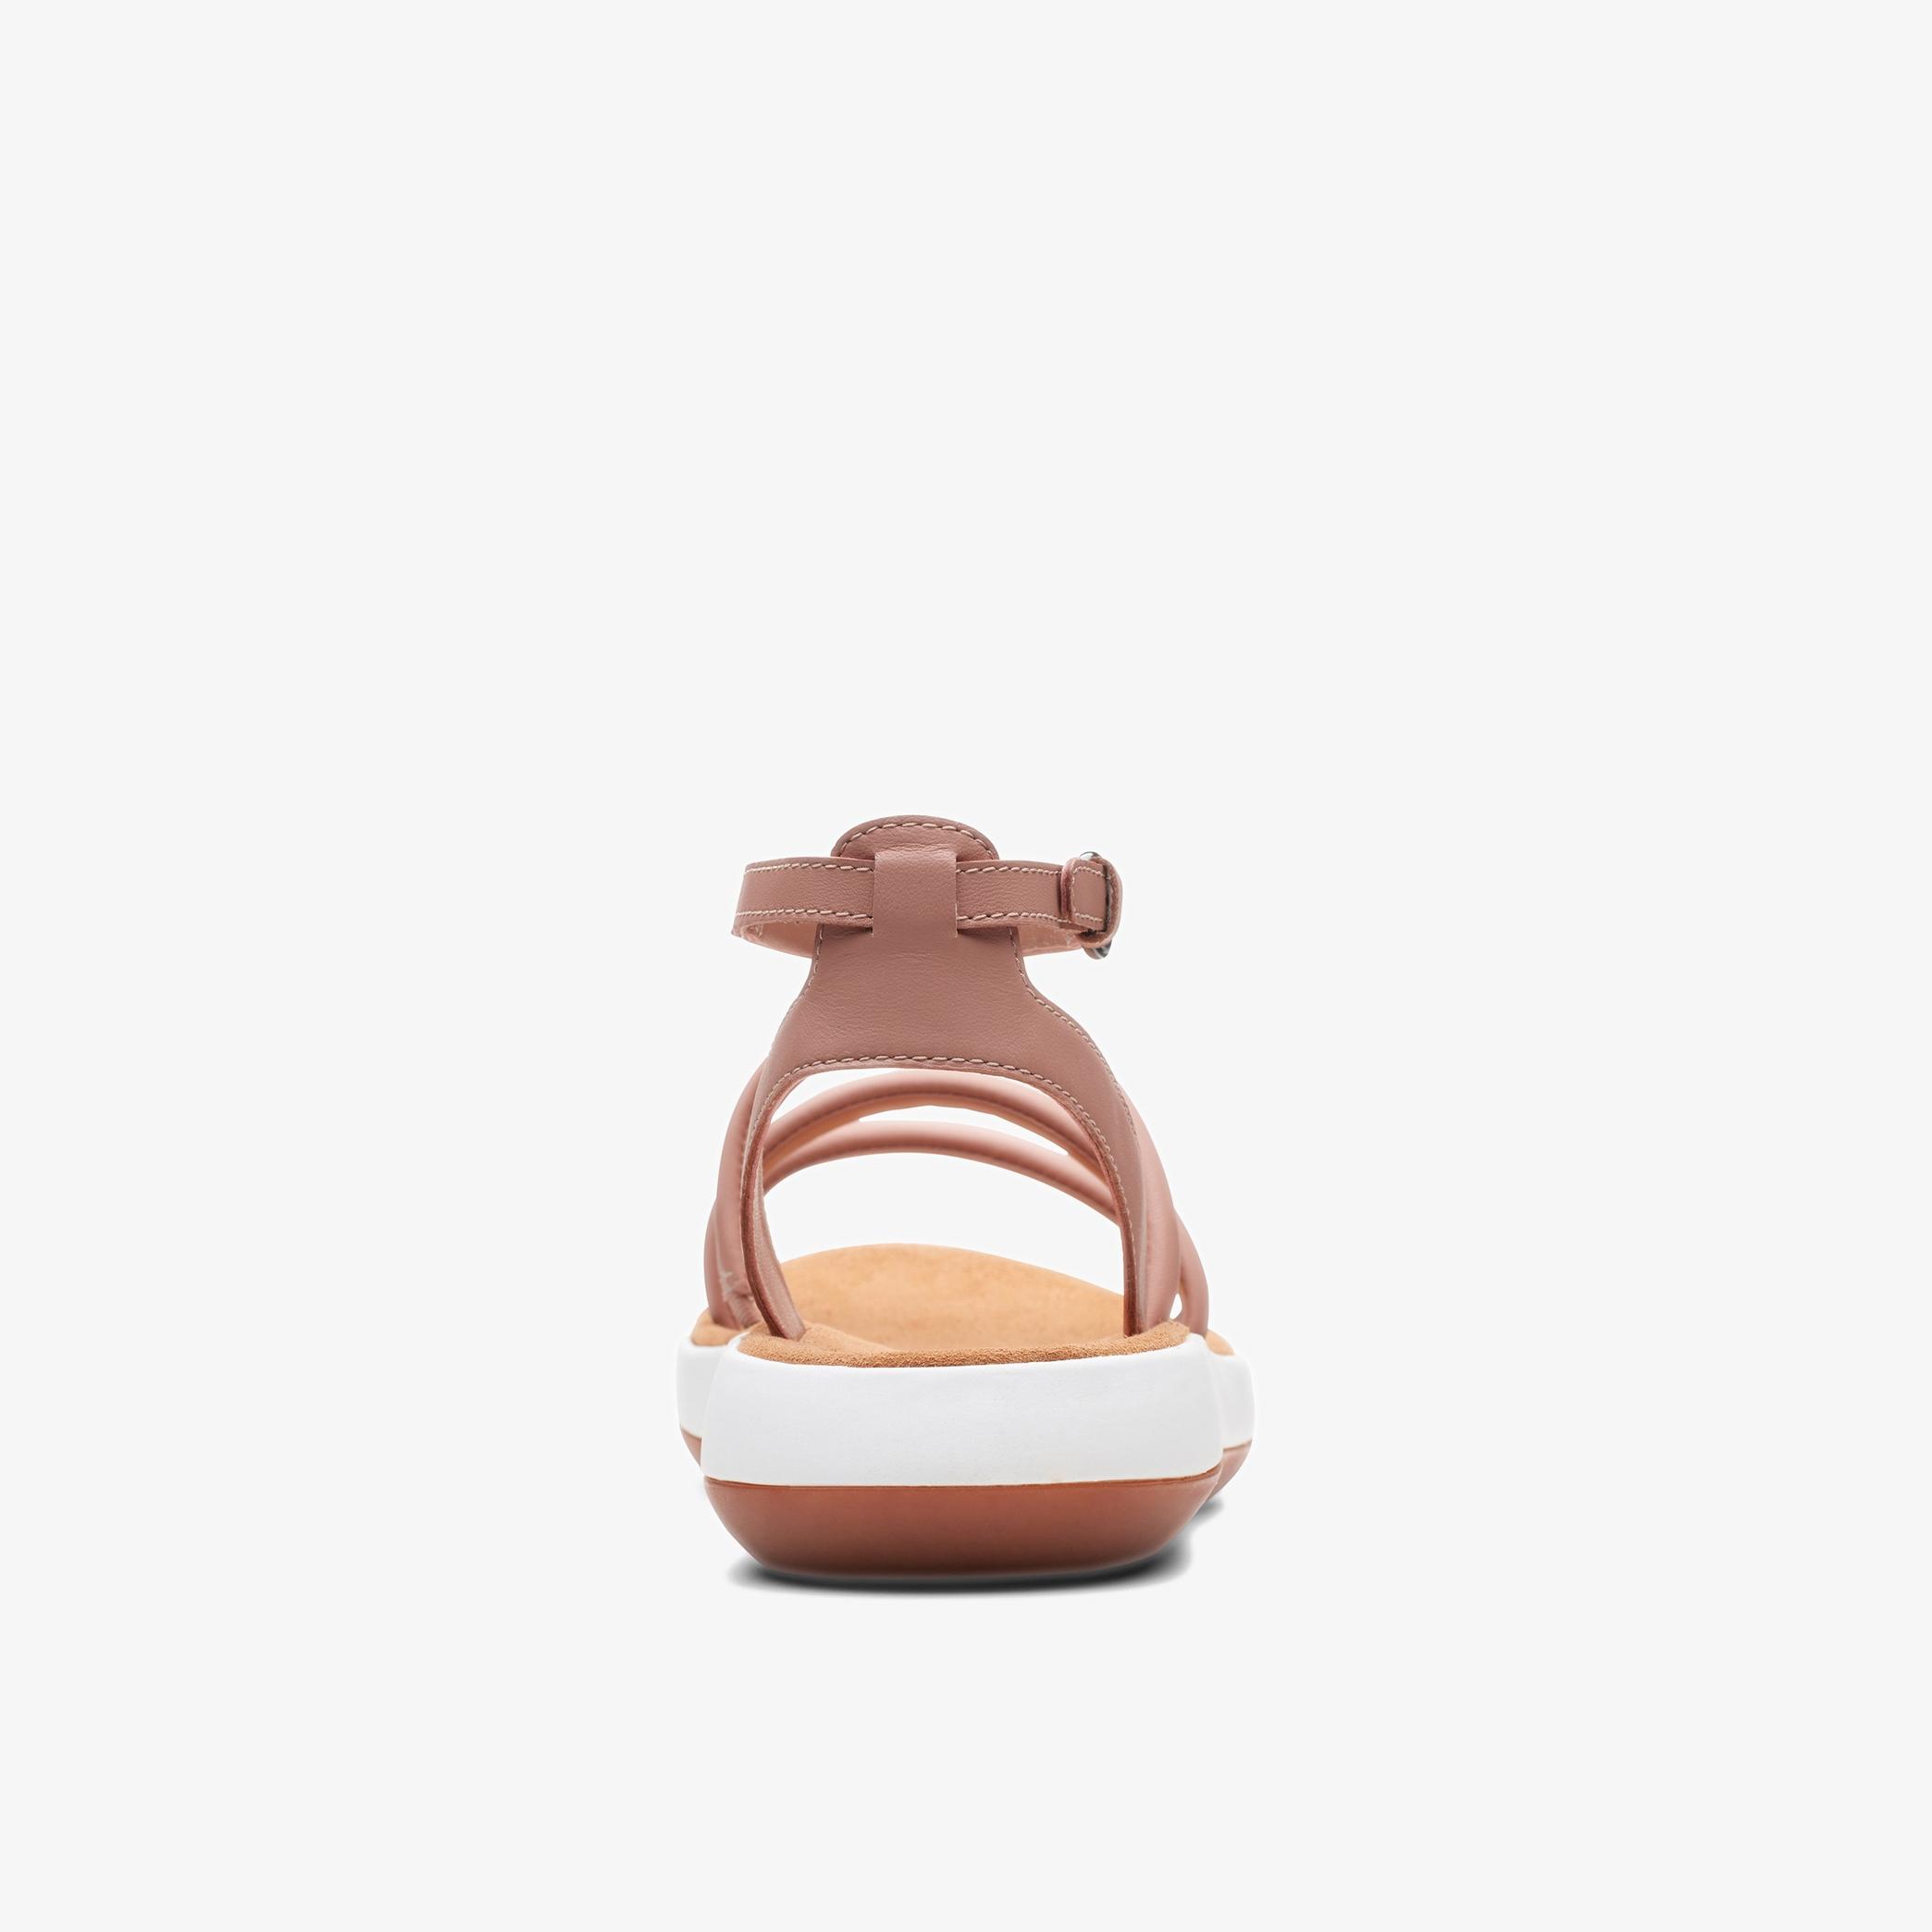 Jemsa Style Rose Leather Flat Sandals, view 5 of 6